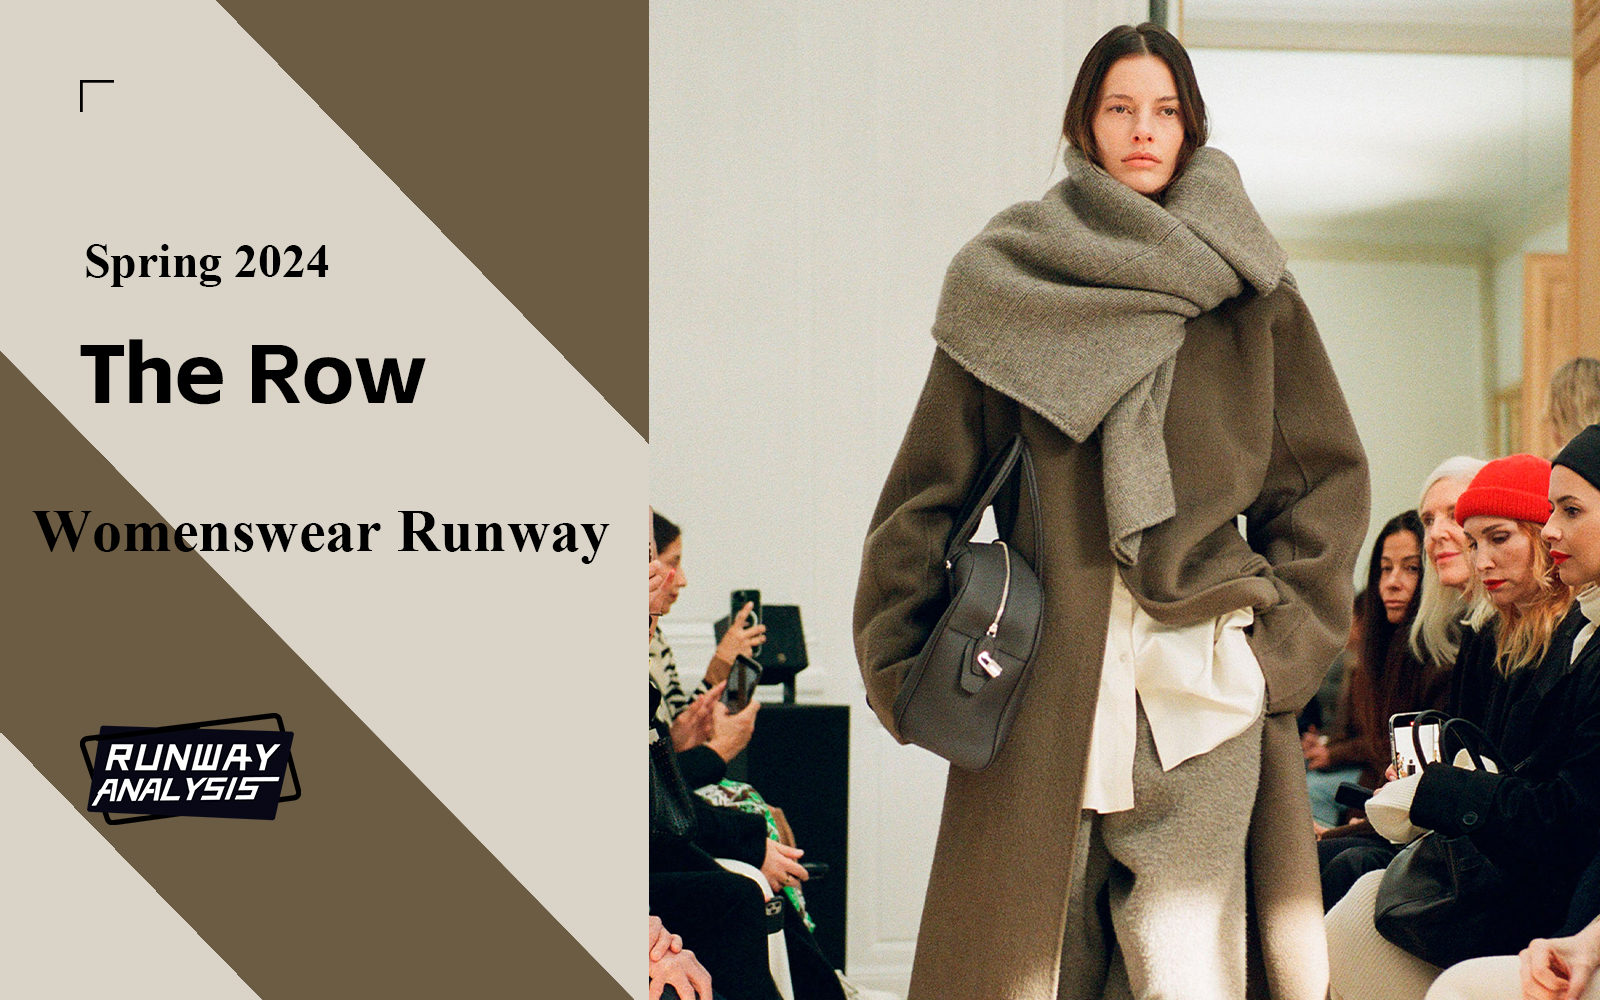 Relaxed Minimalism -- The Womenswear Runway Analysis of The Row